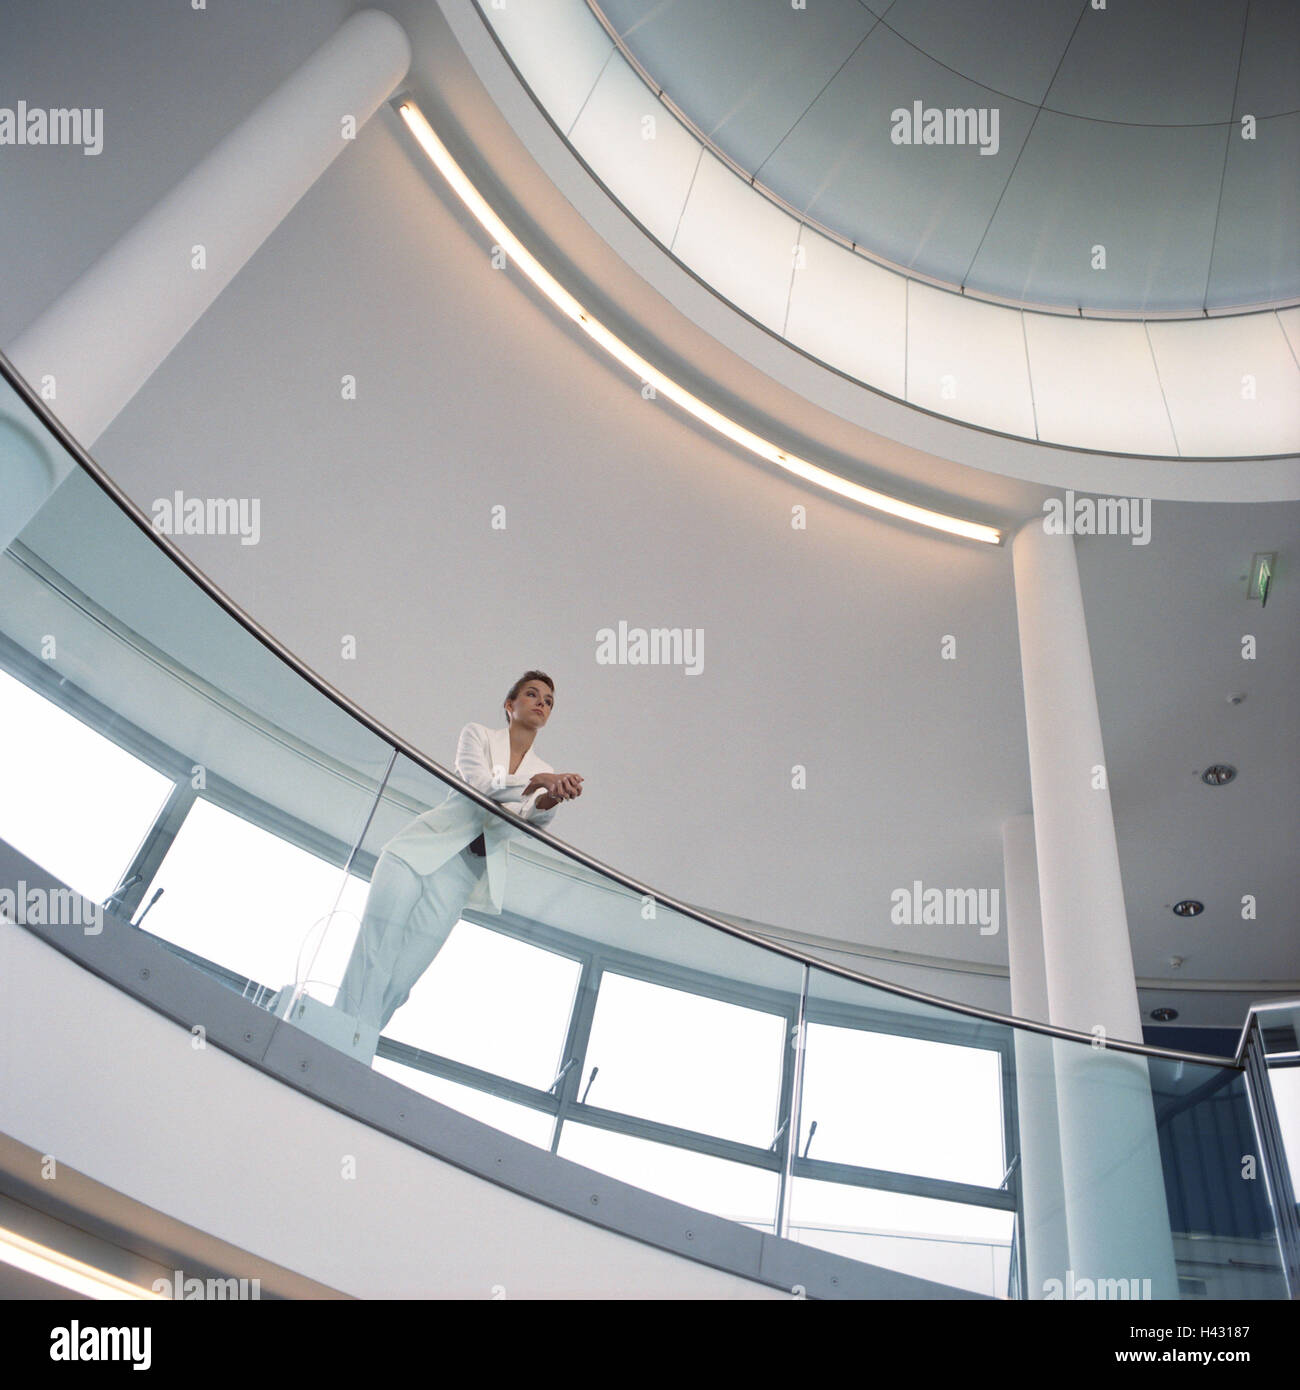 Office buildings, hall, glass balustrade, manager, rest on, thoughtful, from below, business, hall, walk, glass railing, railing, balustrade, glass, woman, 22 years, businesswoman, work break, rest, recover, wait, waiting period, patiently, think, conside Stock Photo